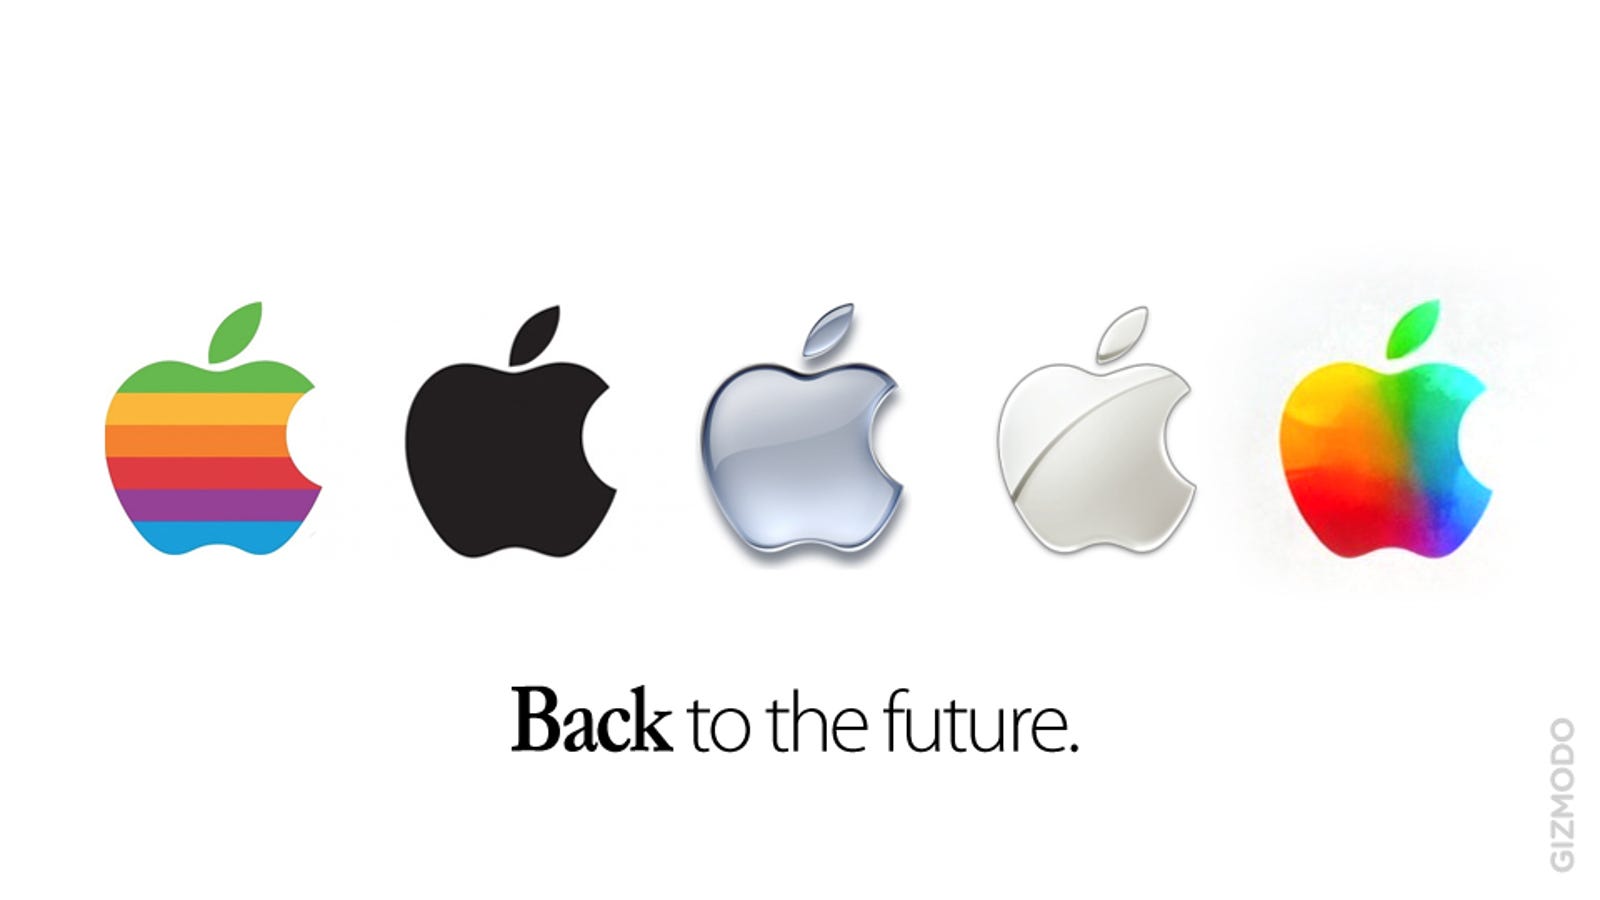 Is This the New Apple Logo?